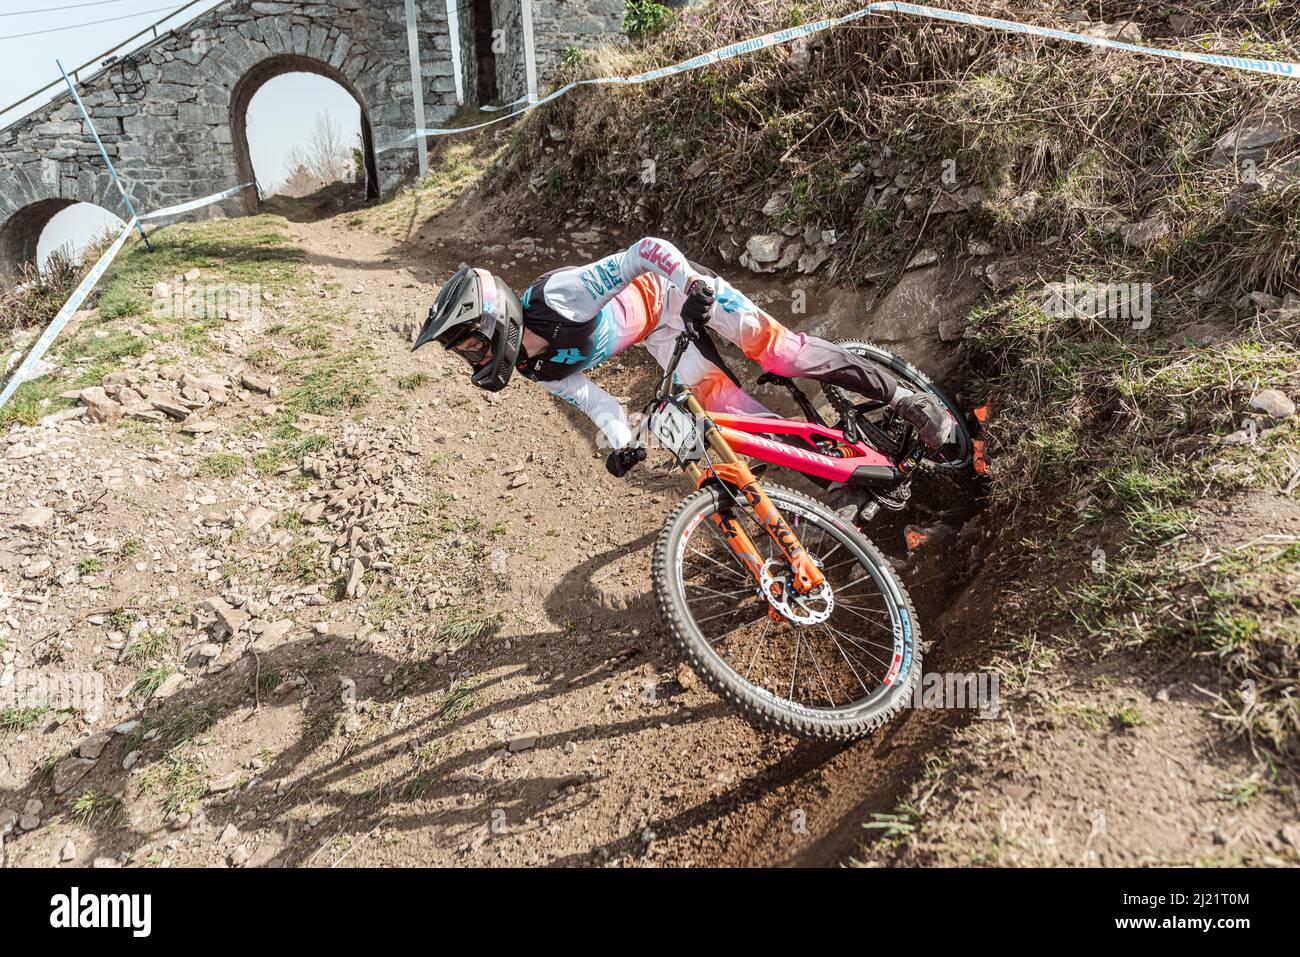 Lourdes, France : 2022 March 27 : LUFFMAN Dennis GBR competes during the UCI Mountain Bike Downhill World Cup 2022 race at the Lourdes, France. Stock Photo